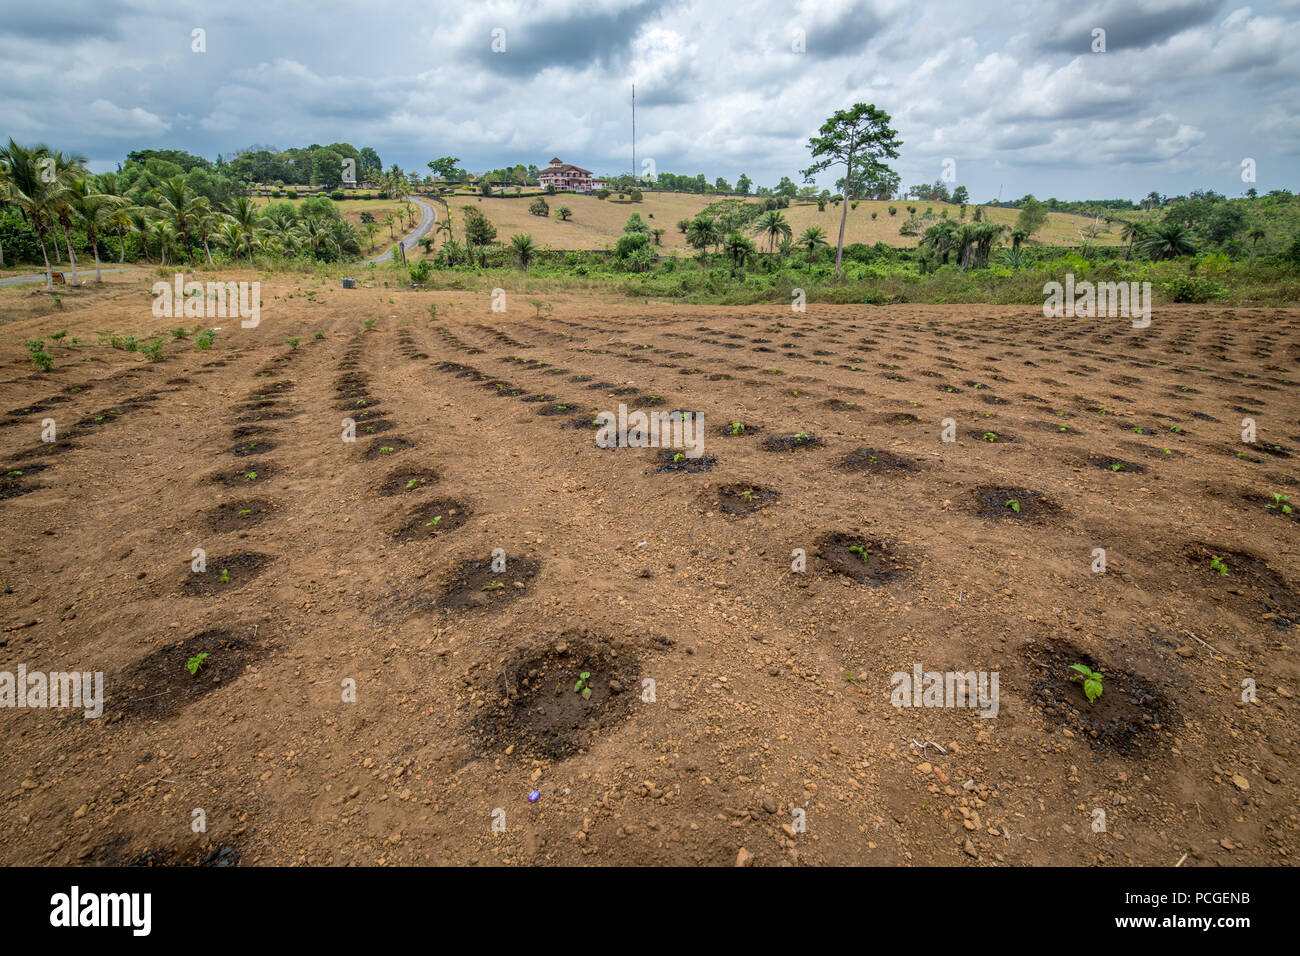 Rows of small pepper plants in the early stages of growth in Ganta, Liberia Stock Photo